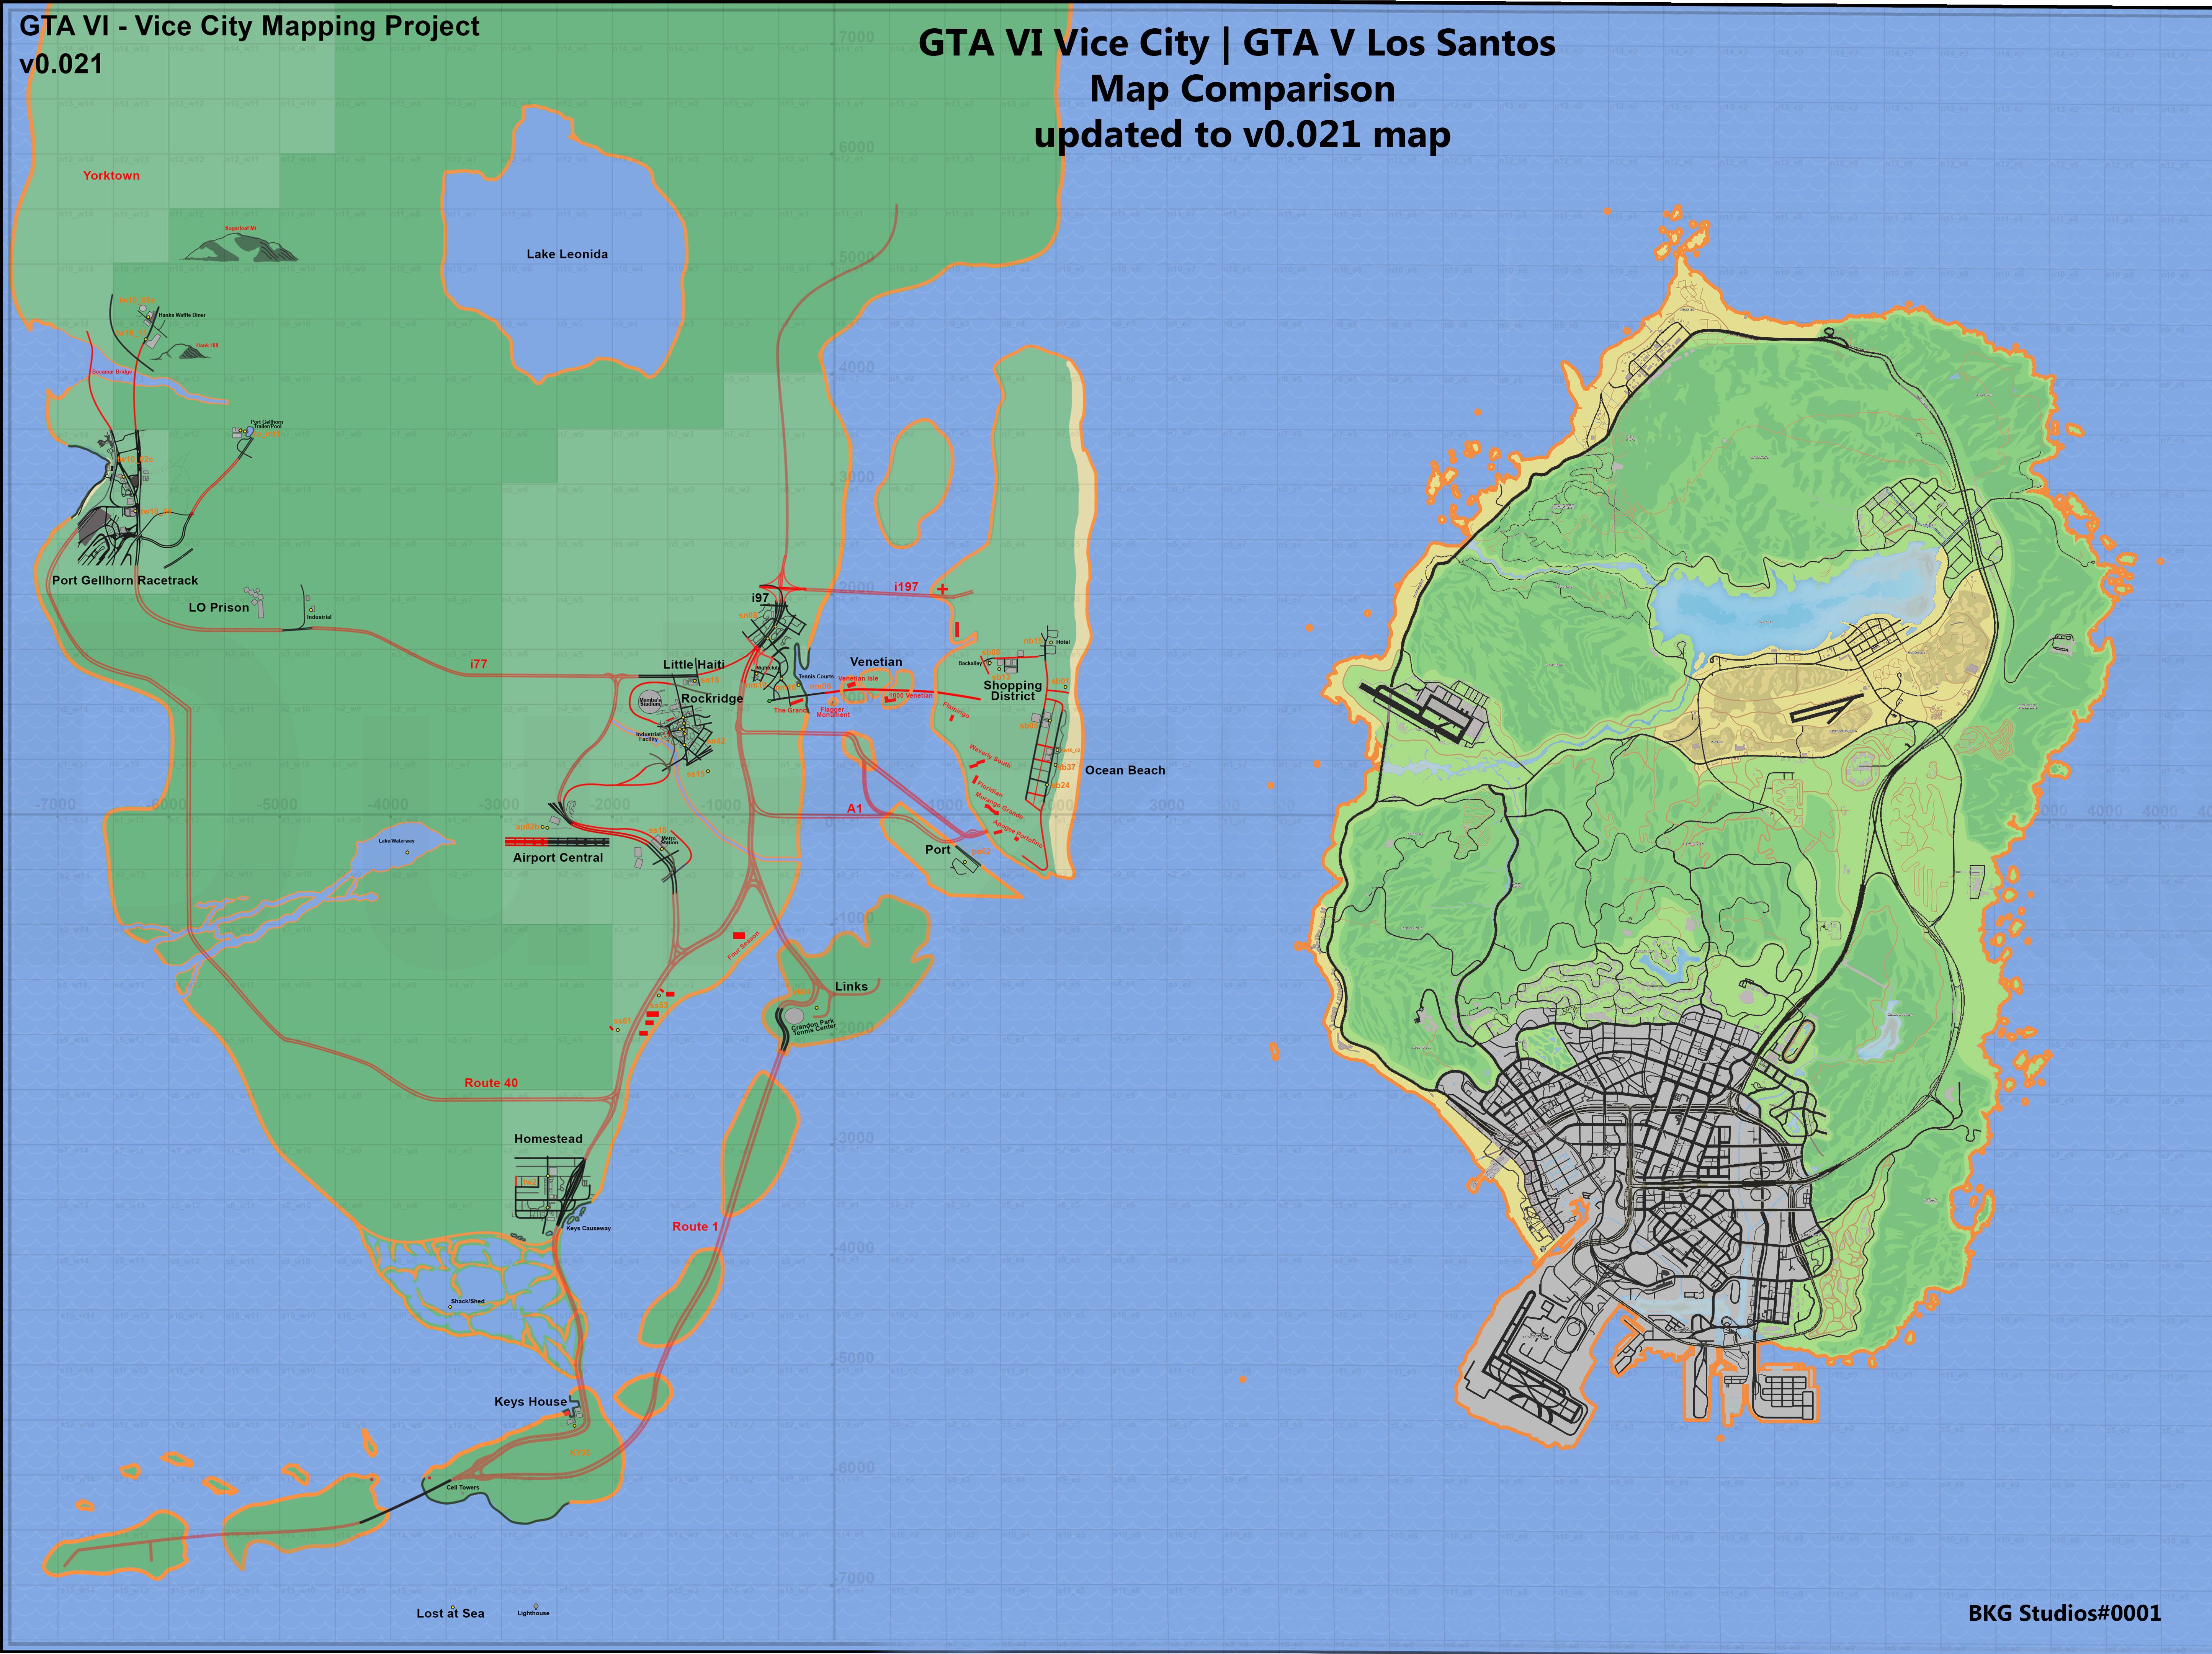 Where Will GTA 6 Take Place? - Answered - Prima Games